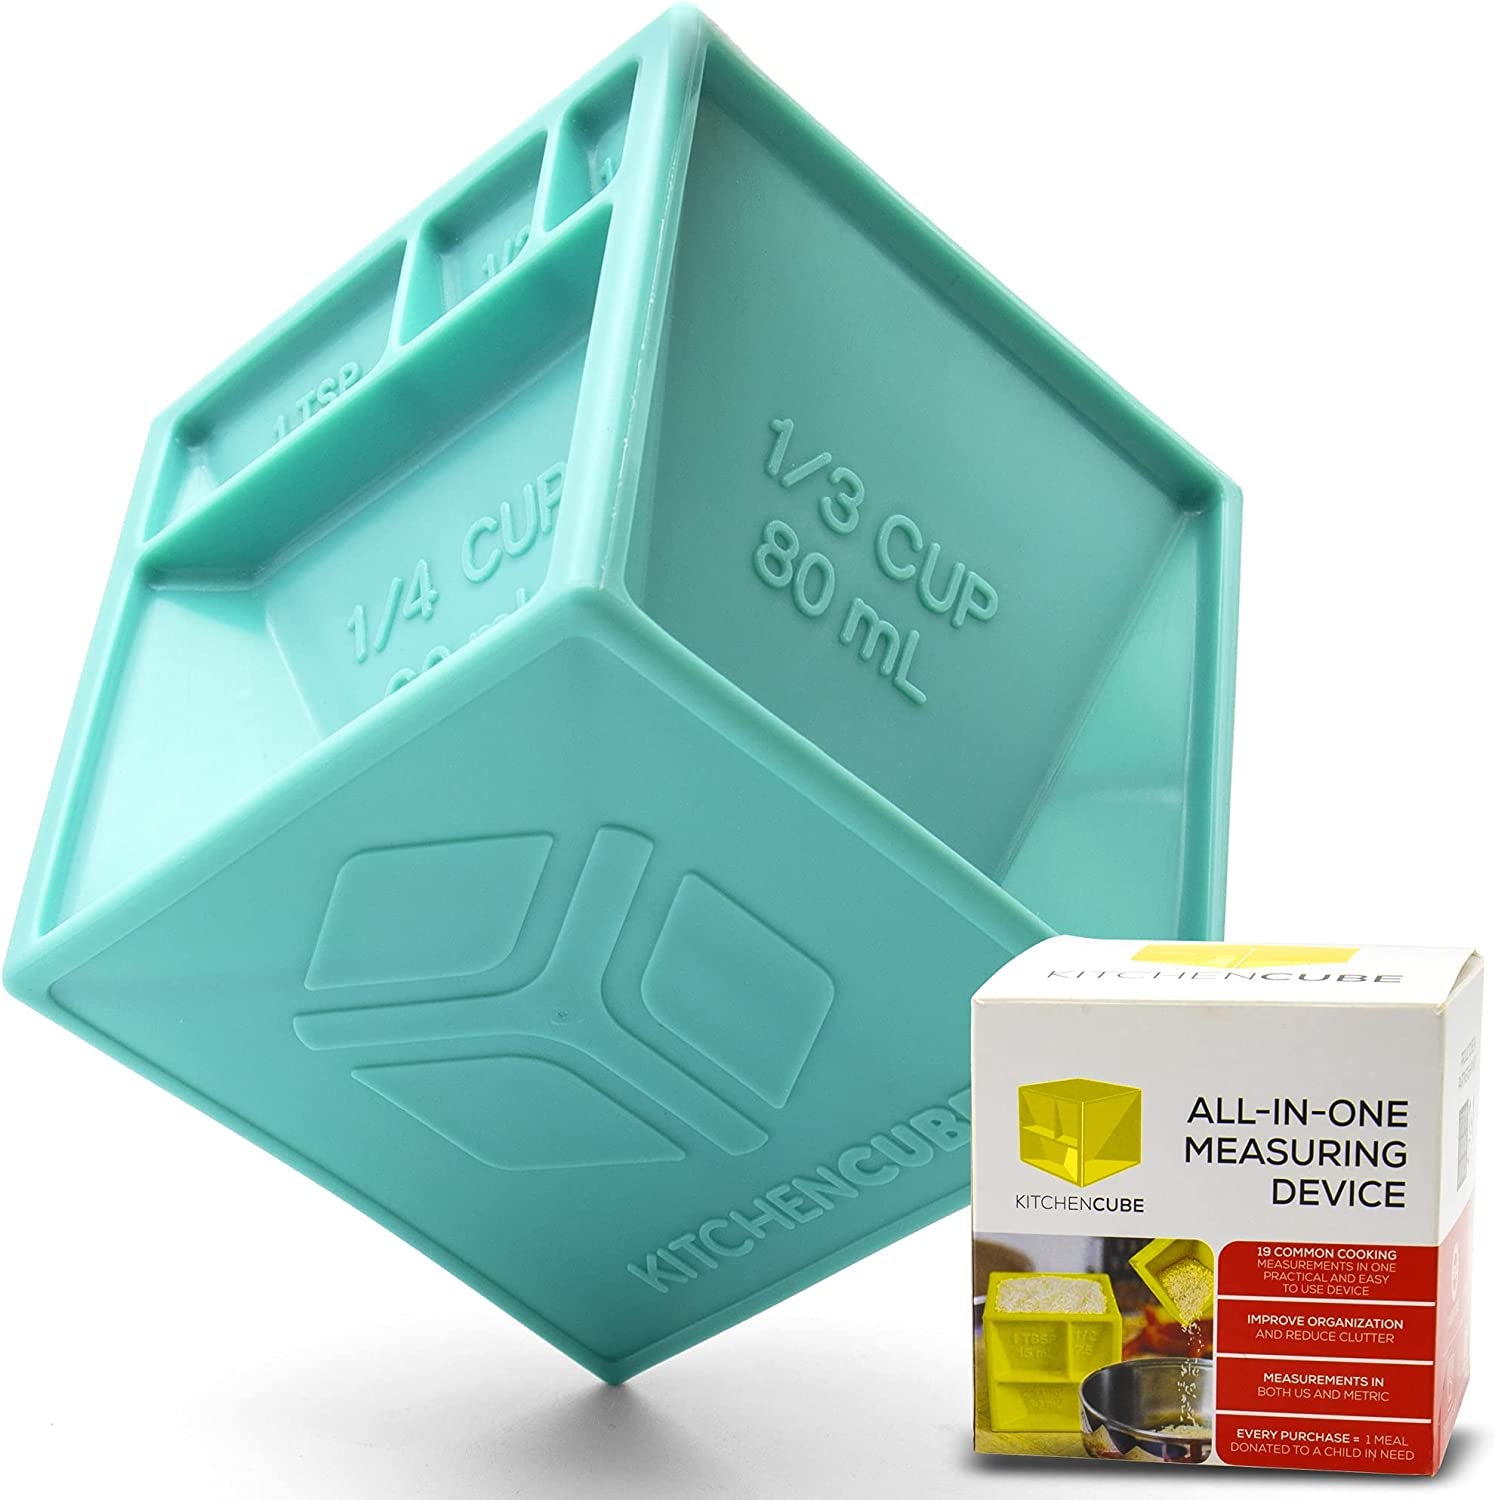 the teal kitchen cube, which has different measurements on each of its sides, next to its box